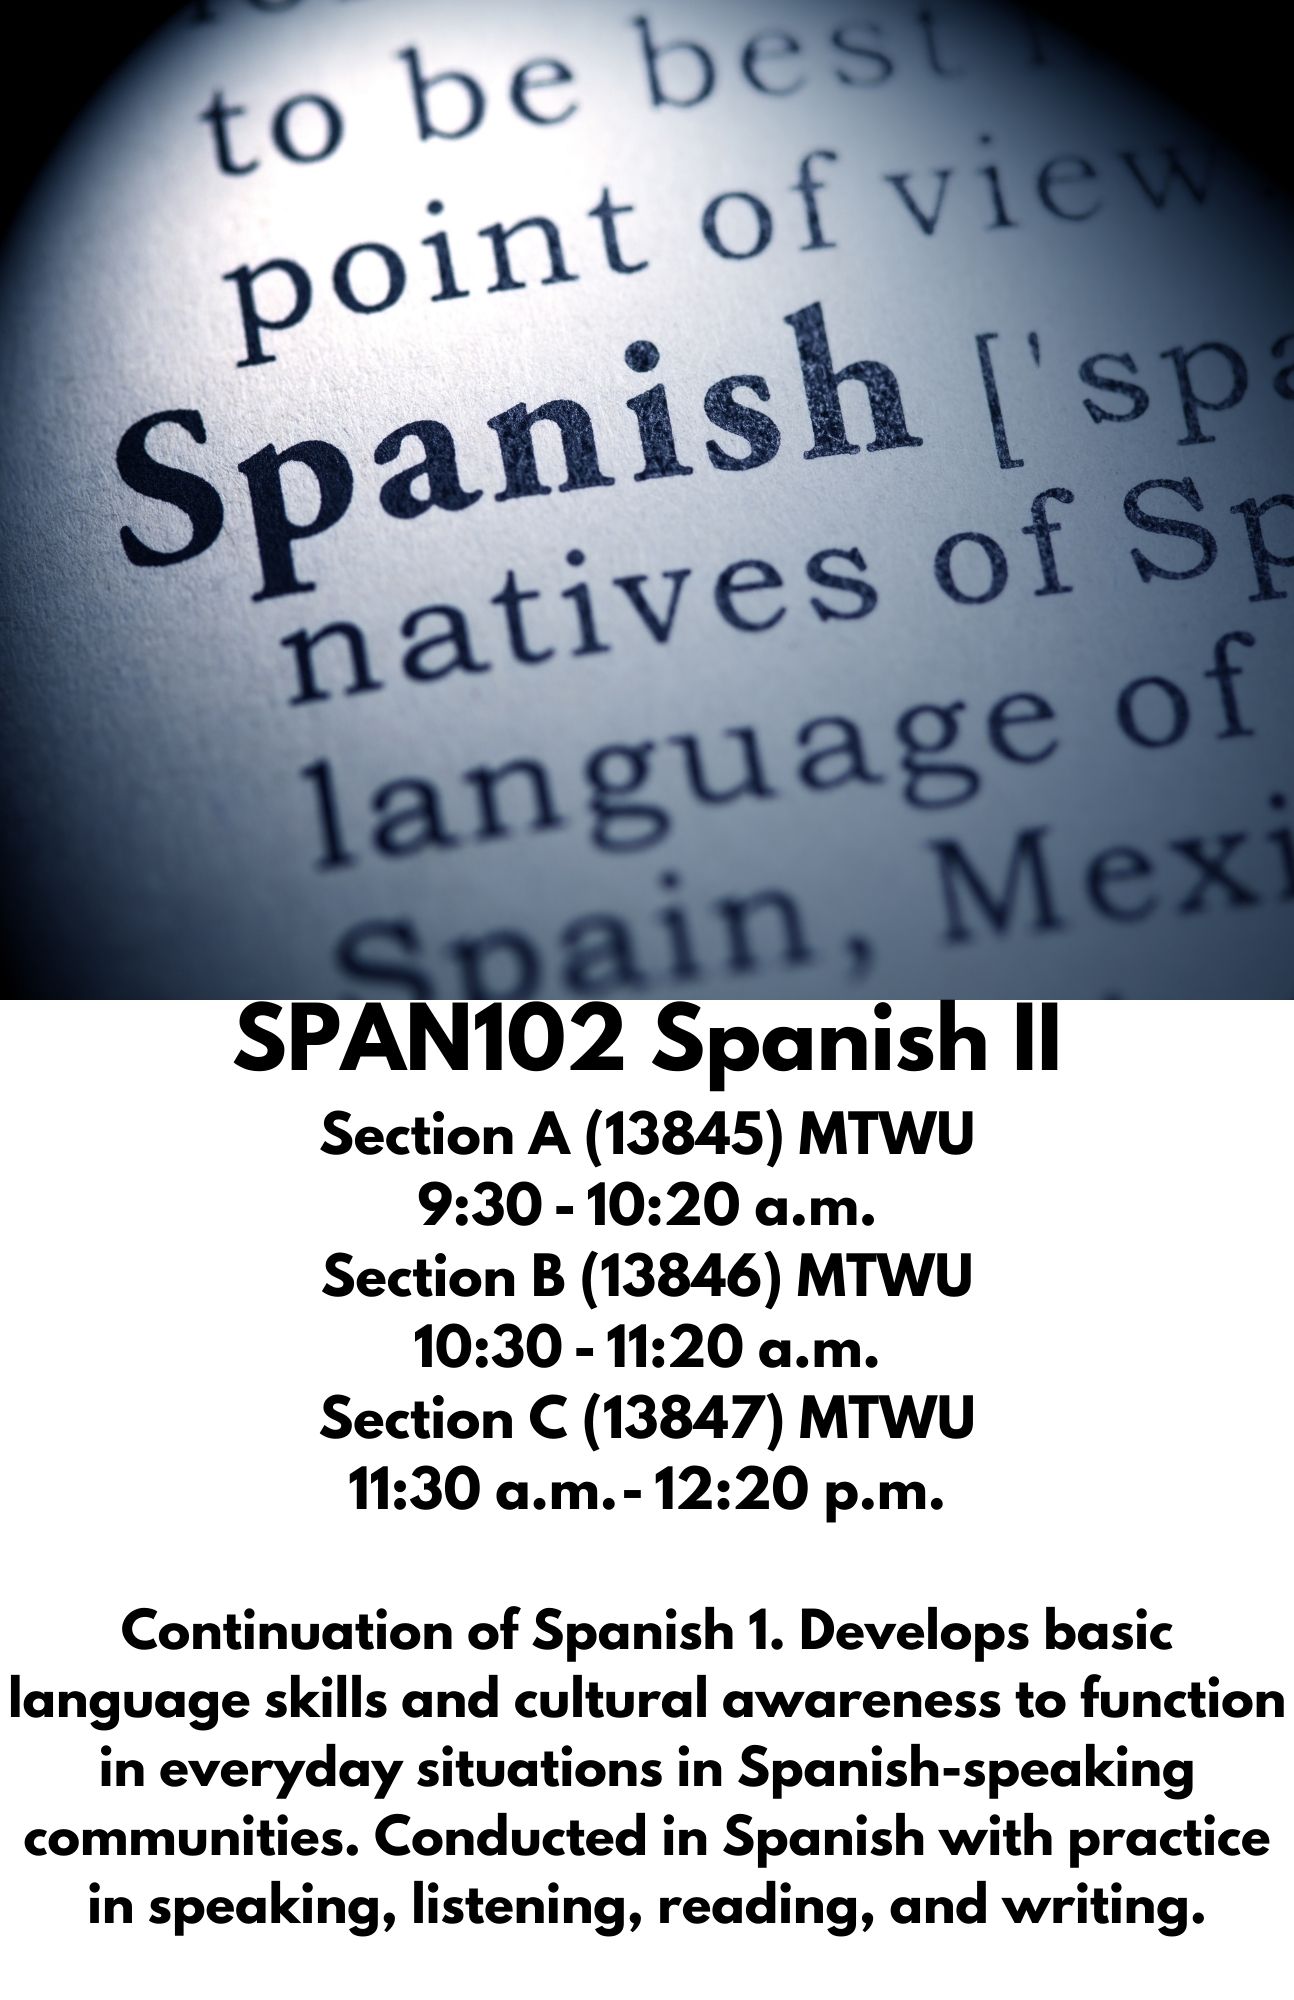 SPAN102 Spanish II Section A (13845) MTWU 9:30 - 10:20 a.m. Section B (13846) MTWU 10:30 - 11:20 a.m. Section C (13847) MTWU 11:30 a.m. - 12:20 p.m.  Continuation of Spanish 1. Develops basic language skills and cultural awareness to function in everyday situations in Spanish-speaking communities. Conducted in Spanish with practice in speaking, listening, reading, and writing.